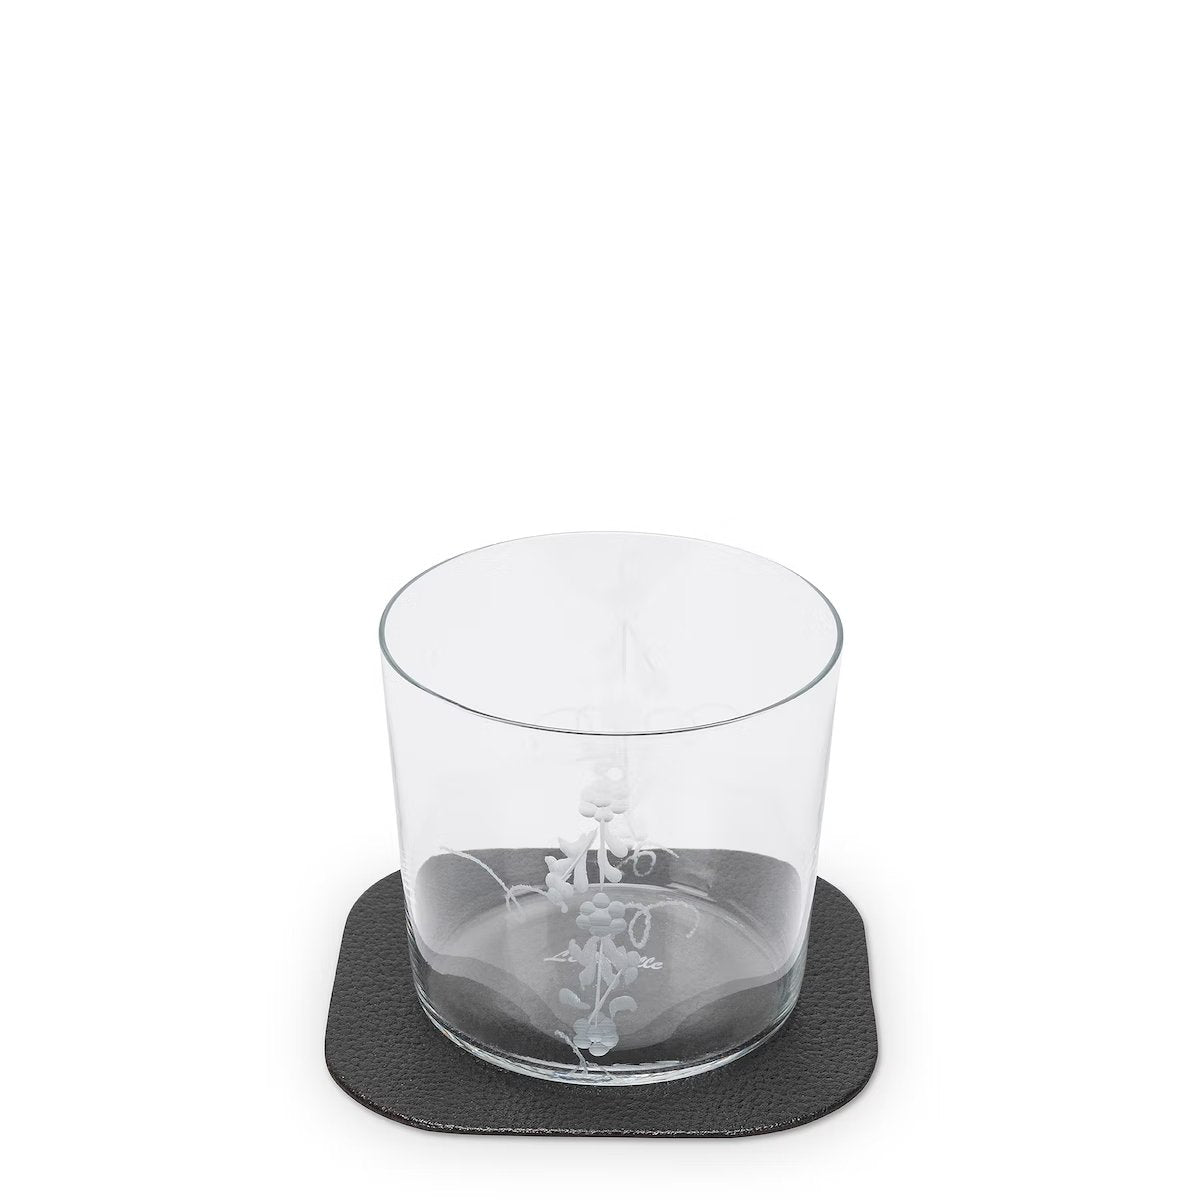 A textured washable paper coaster is shown in black under a water glass.